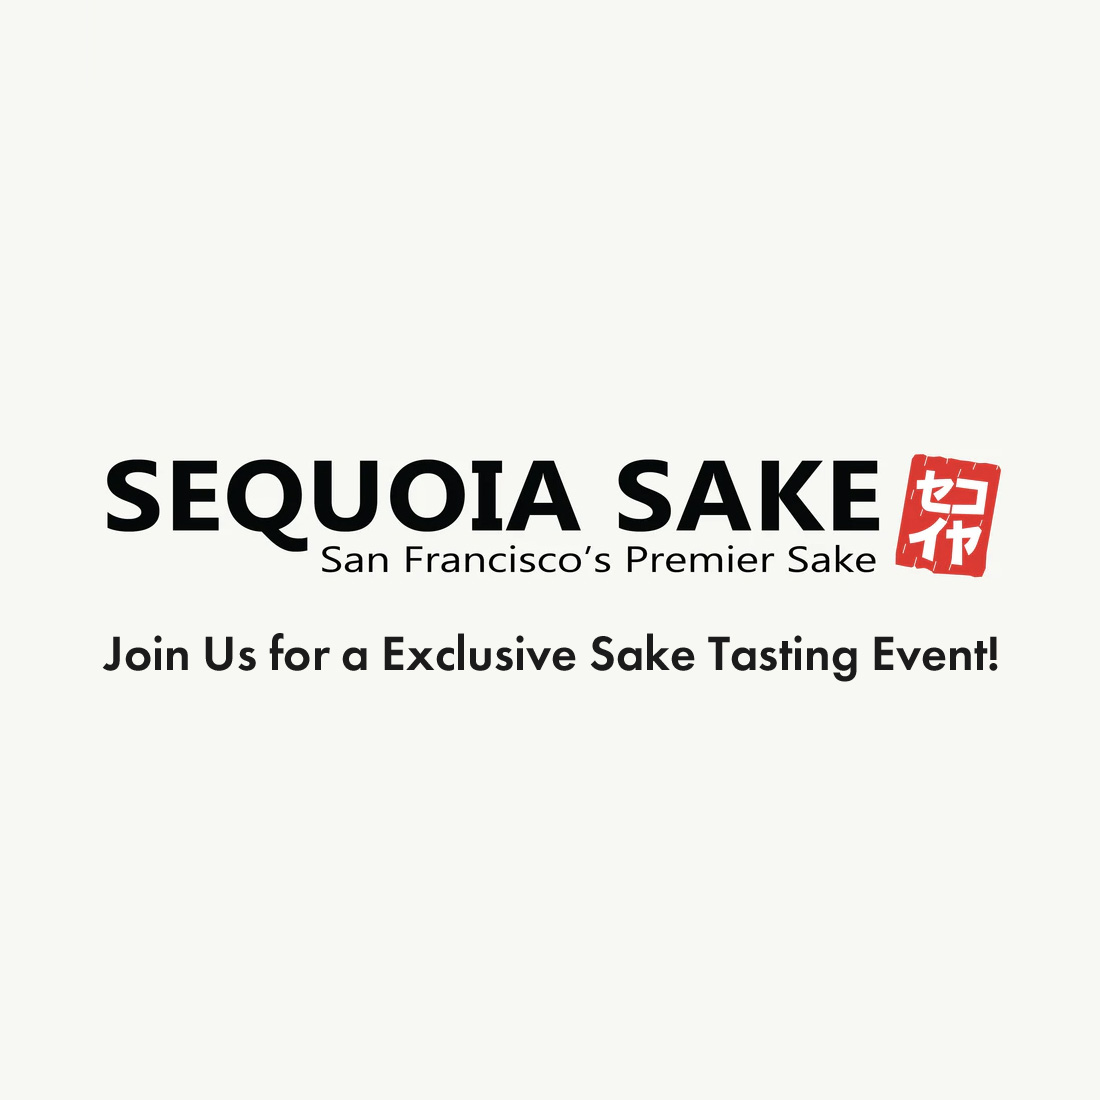 Join Us for a Exclusive Sake Tasting Event @SEQUOIUA SAKE